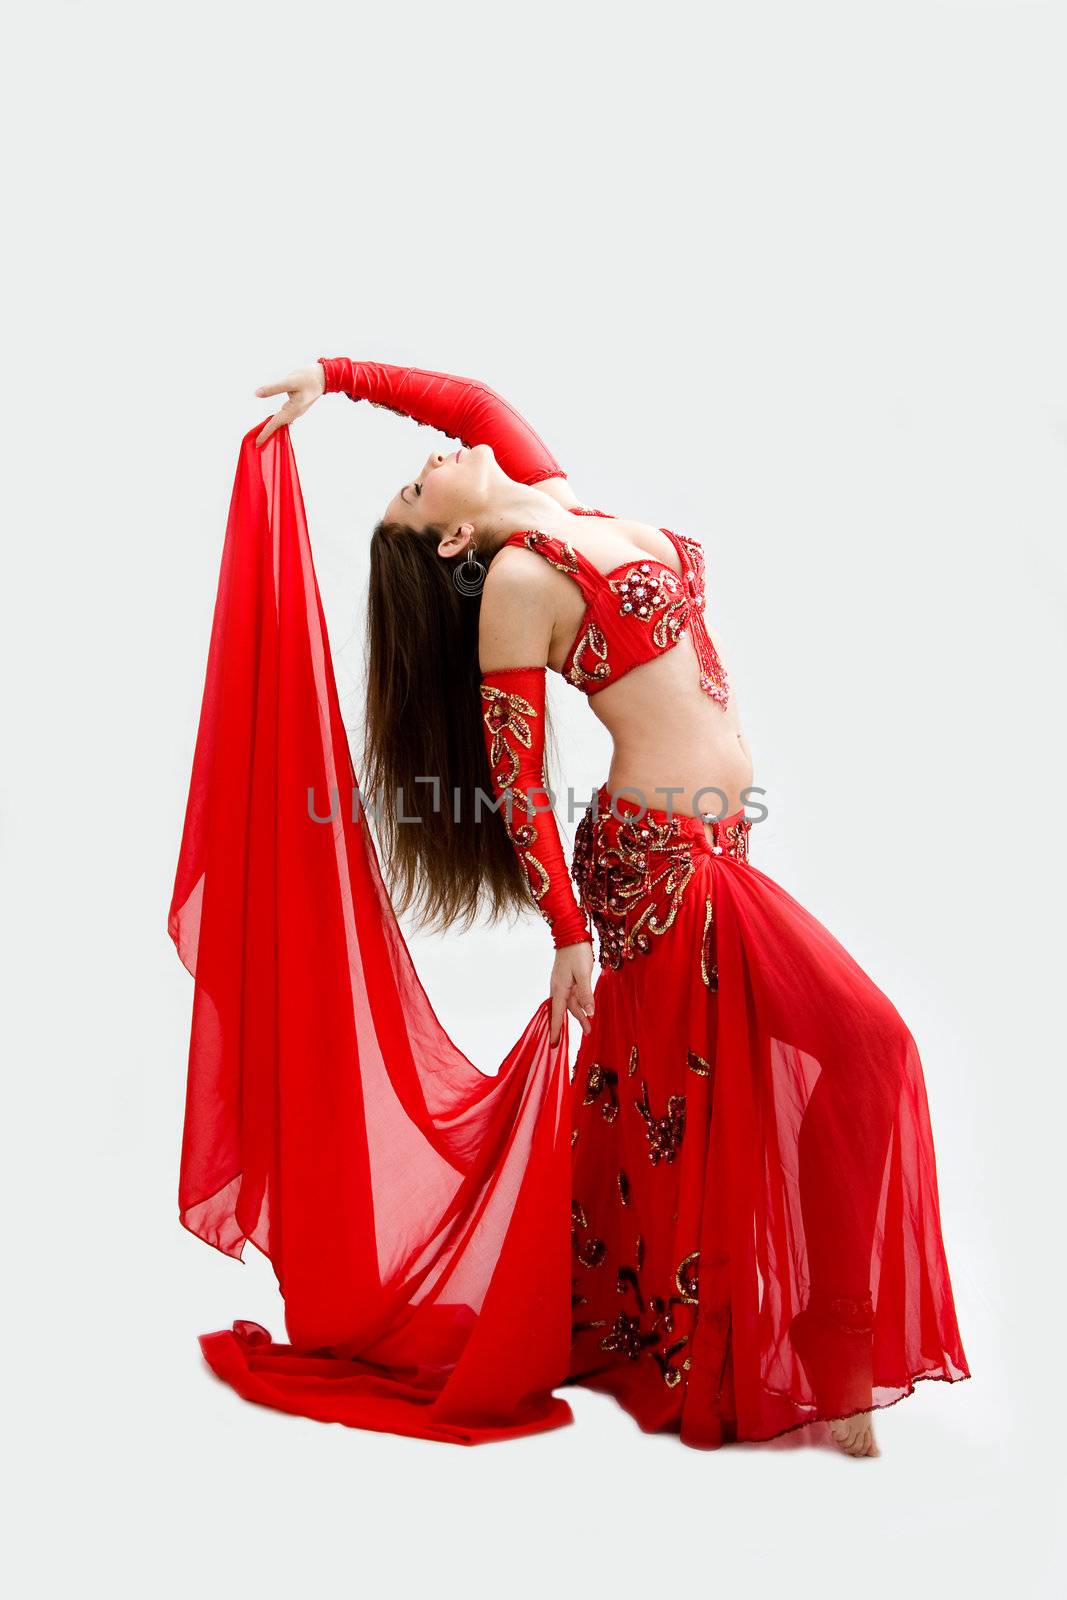 Belly dancer in red by phakimata